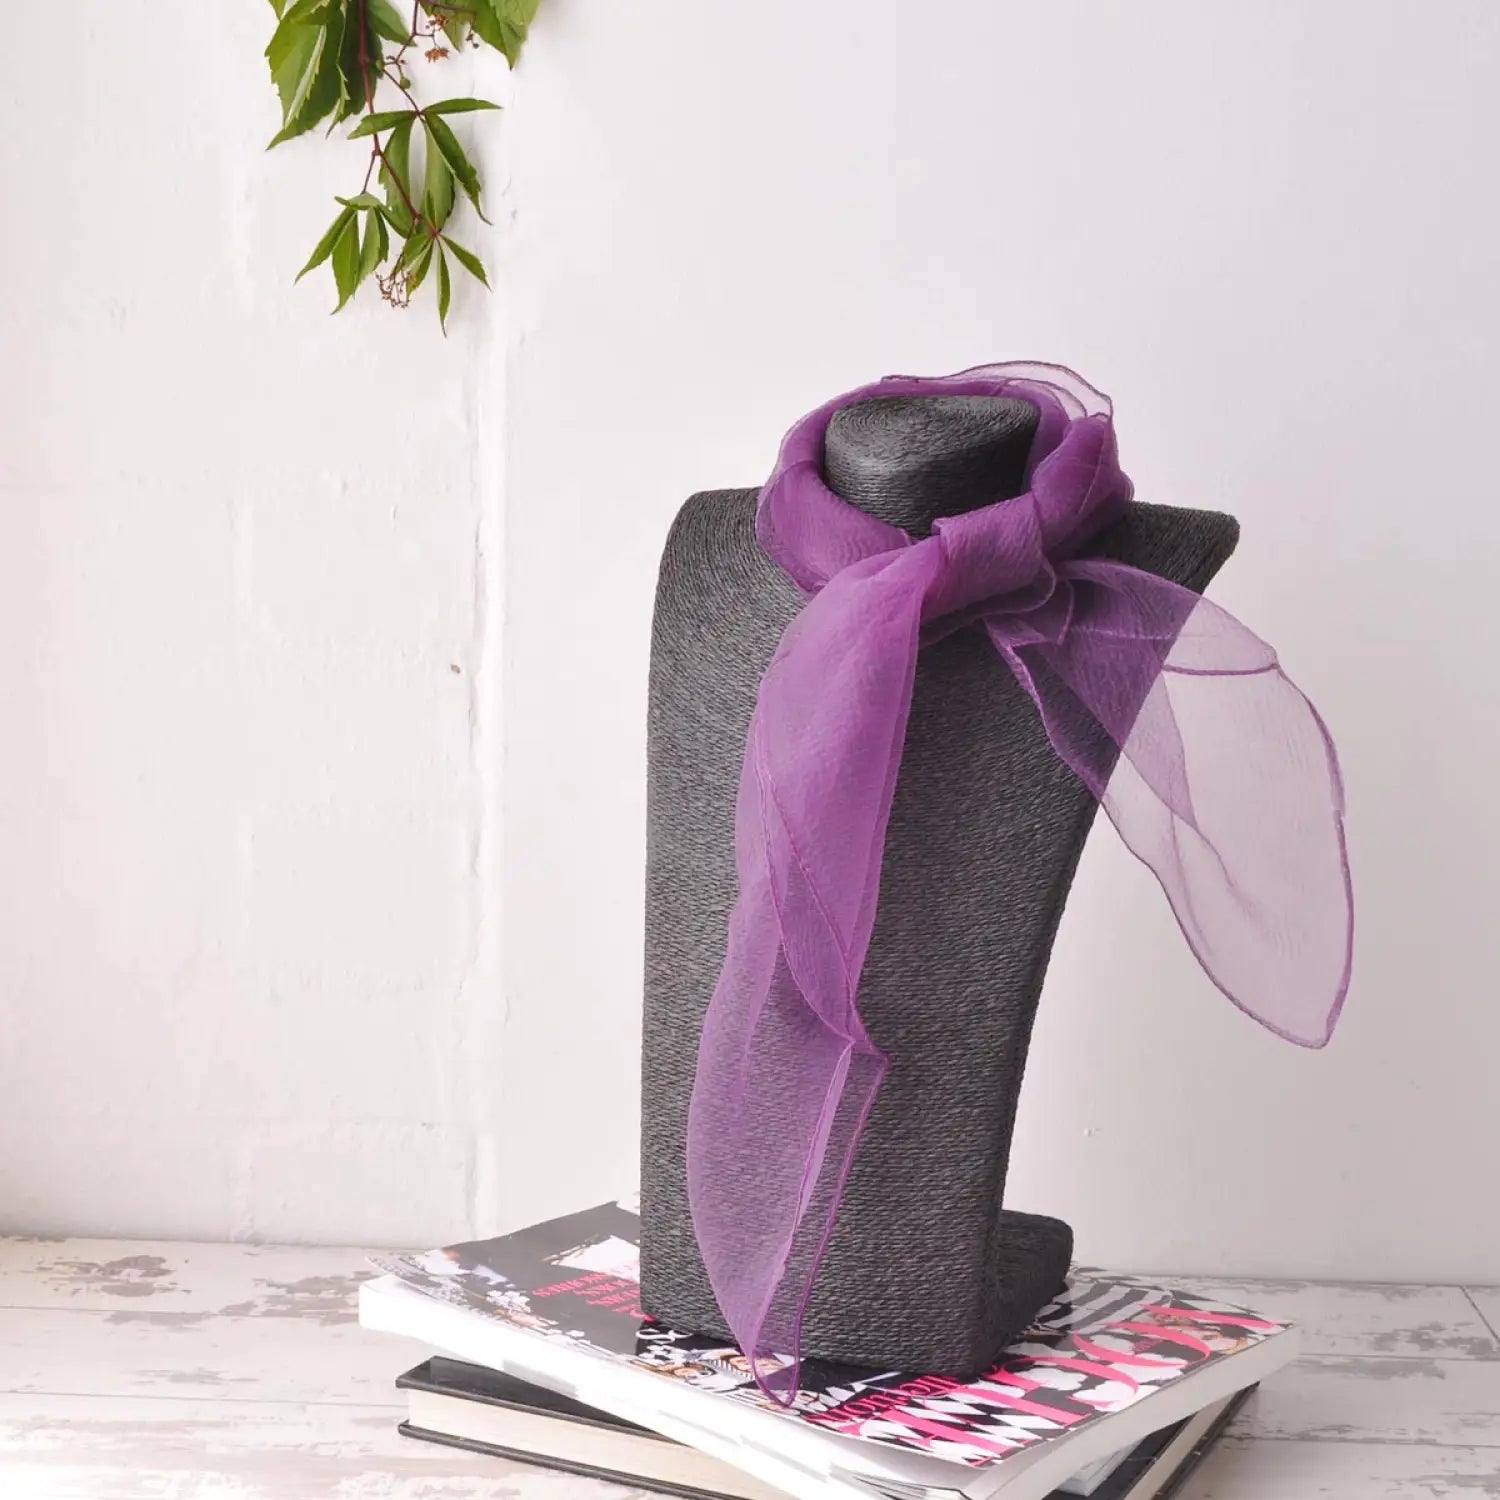 Chiffon square scarf in purple color on top of a book.